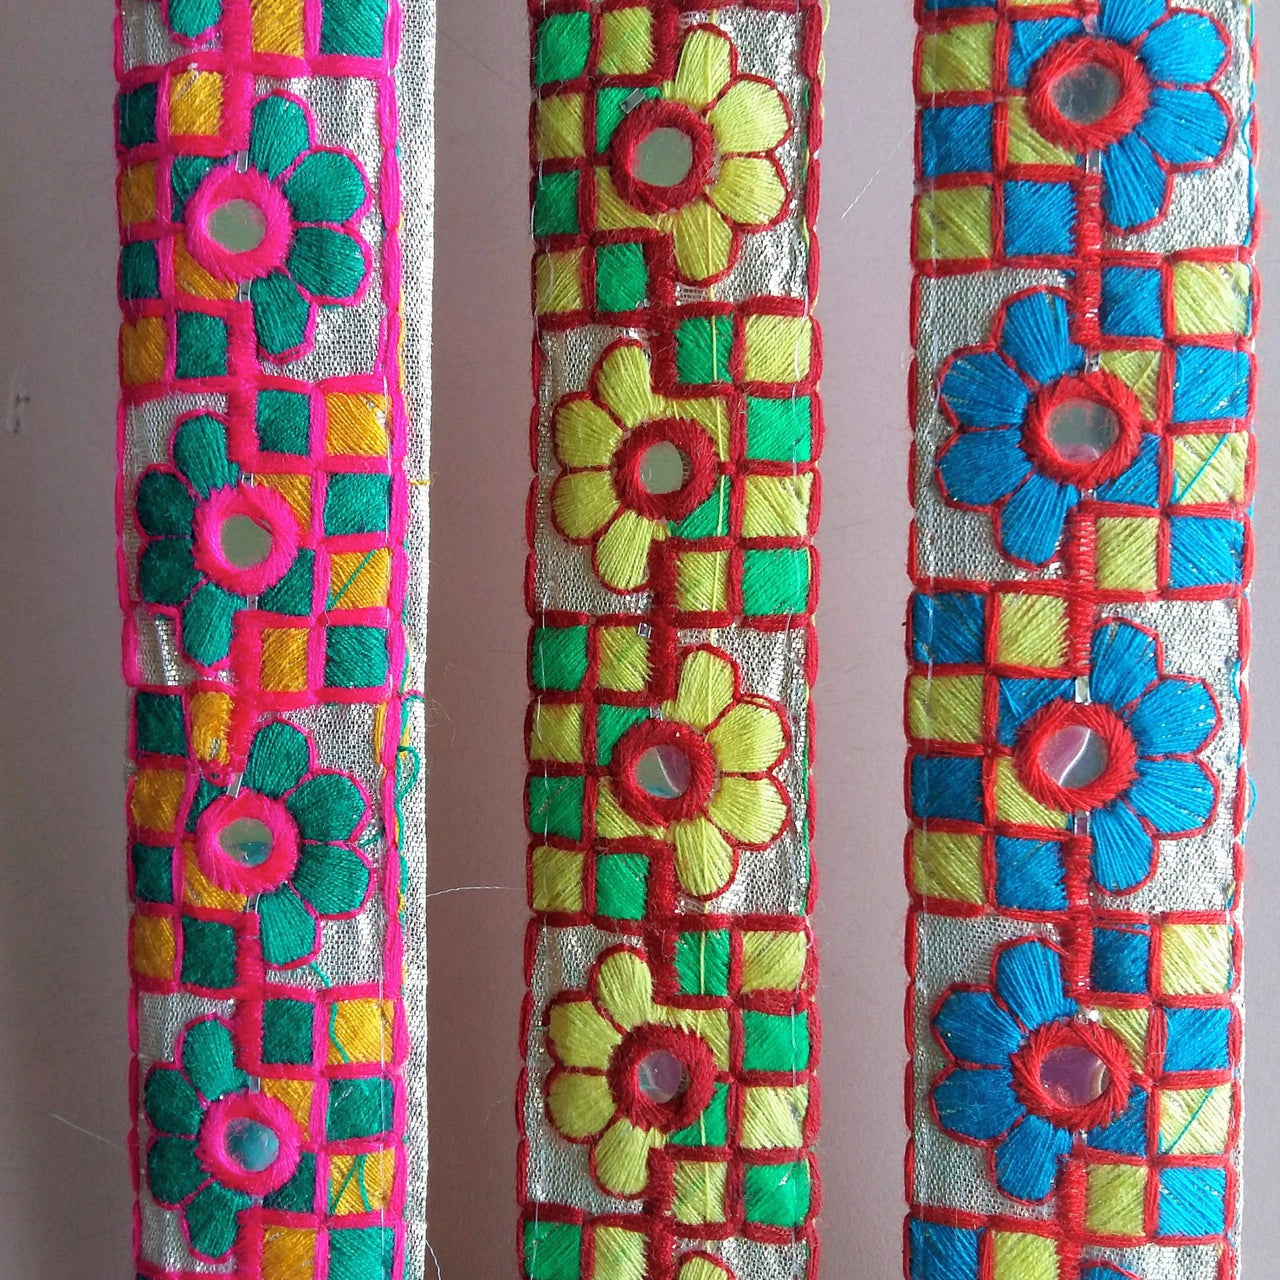 Gold Mirrored Fabric Trim With Blue, Yellow And Red Floral And Square Embroidery, Approx. 32mm Wide